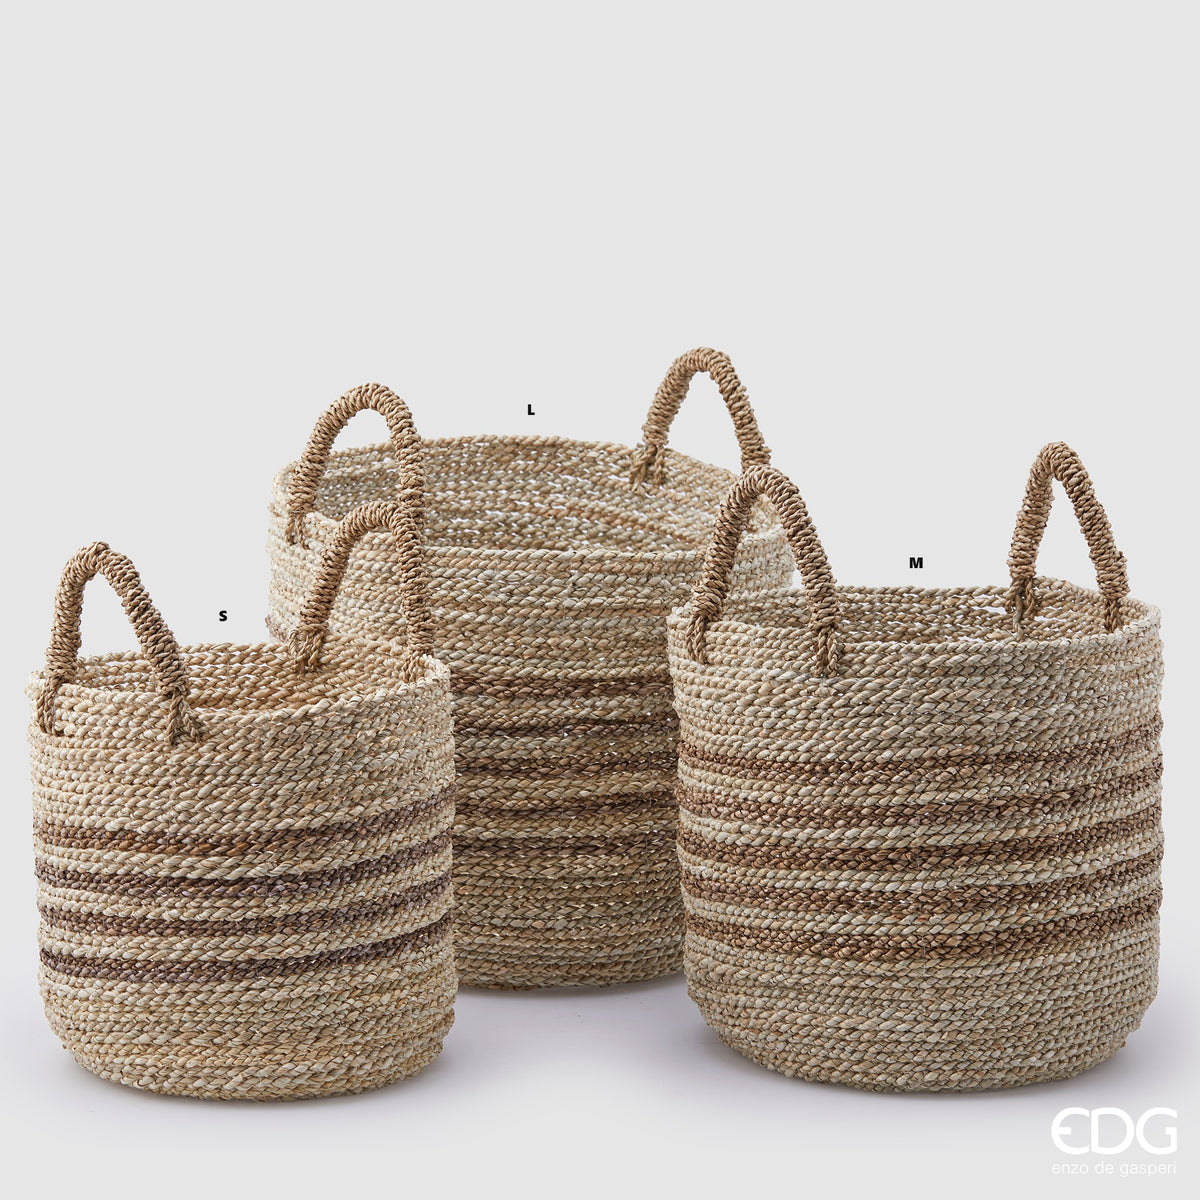 Edg - round brown striped basket with handle | rohome